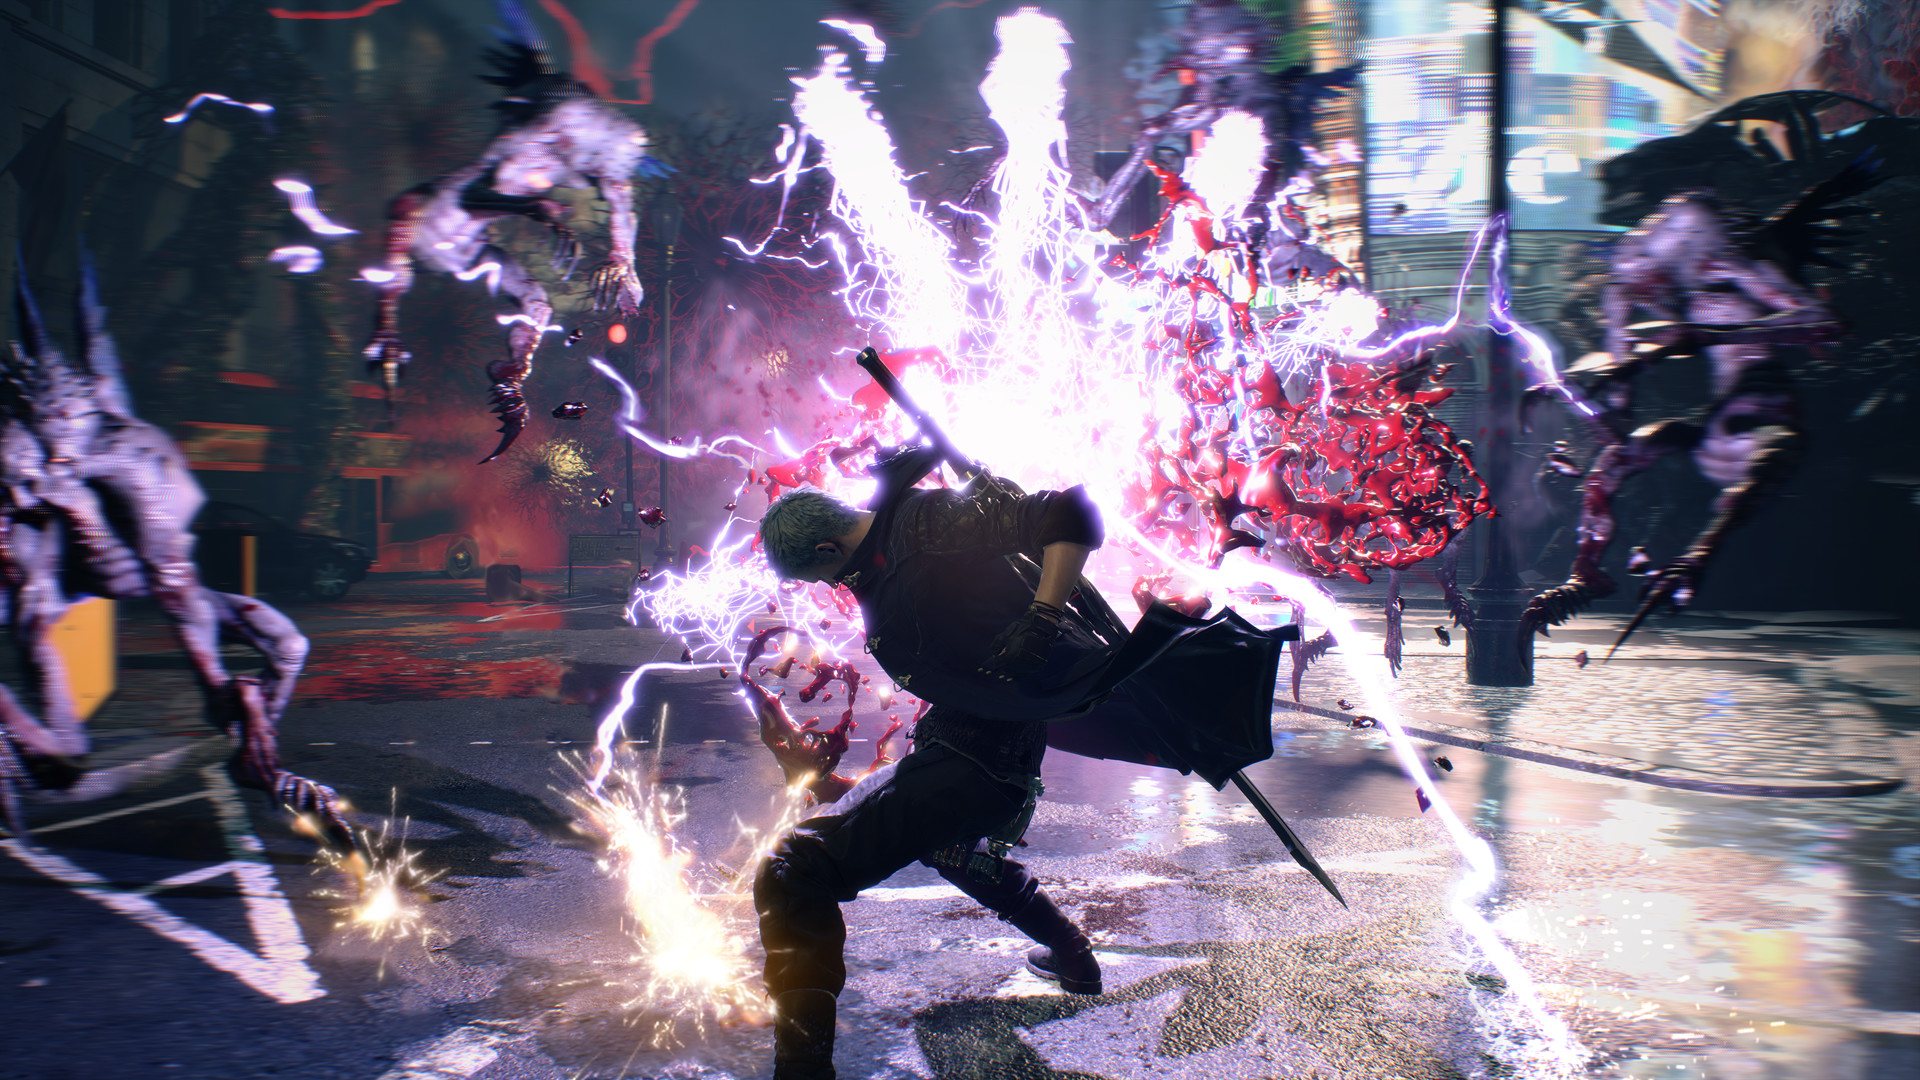 [$ 7.66] Devil May Cry 5 + Playable Character: Vergil DLC Steam CD Key